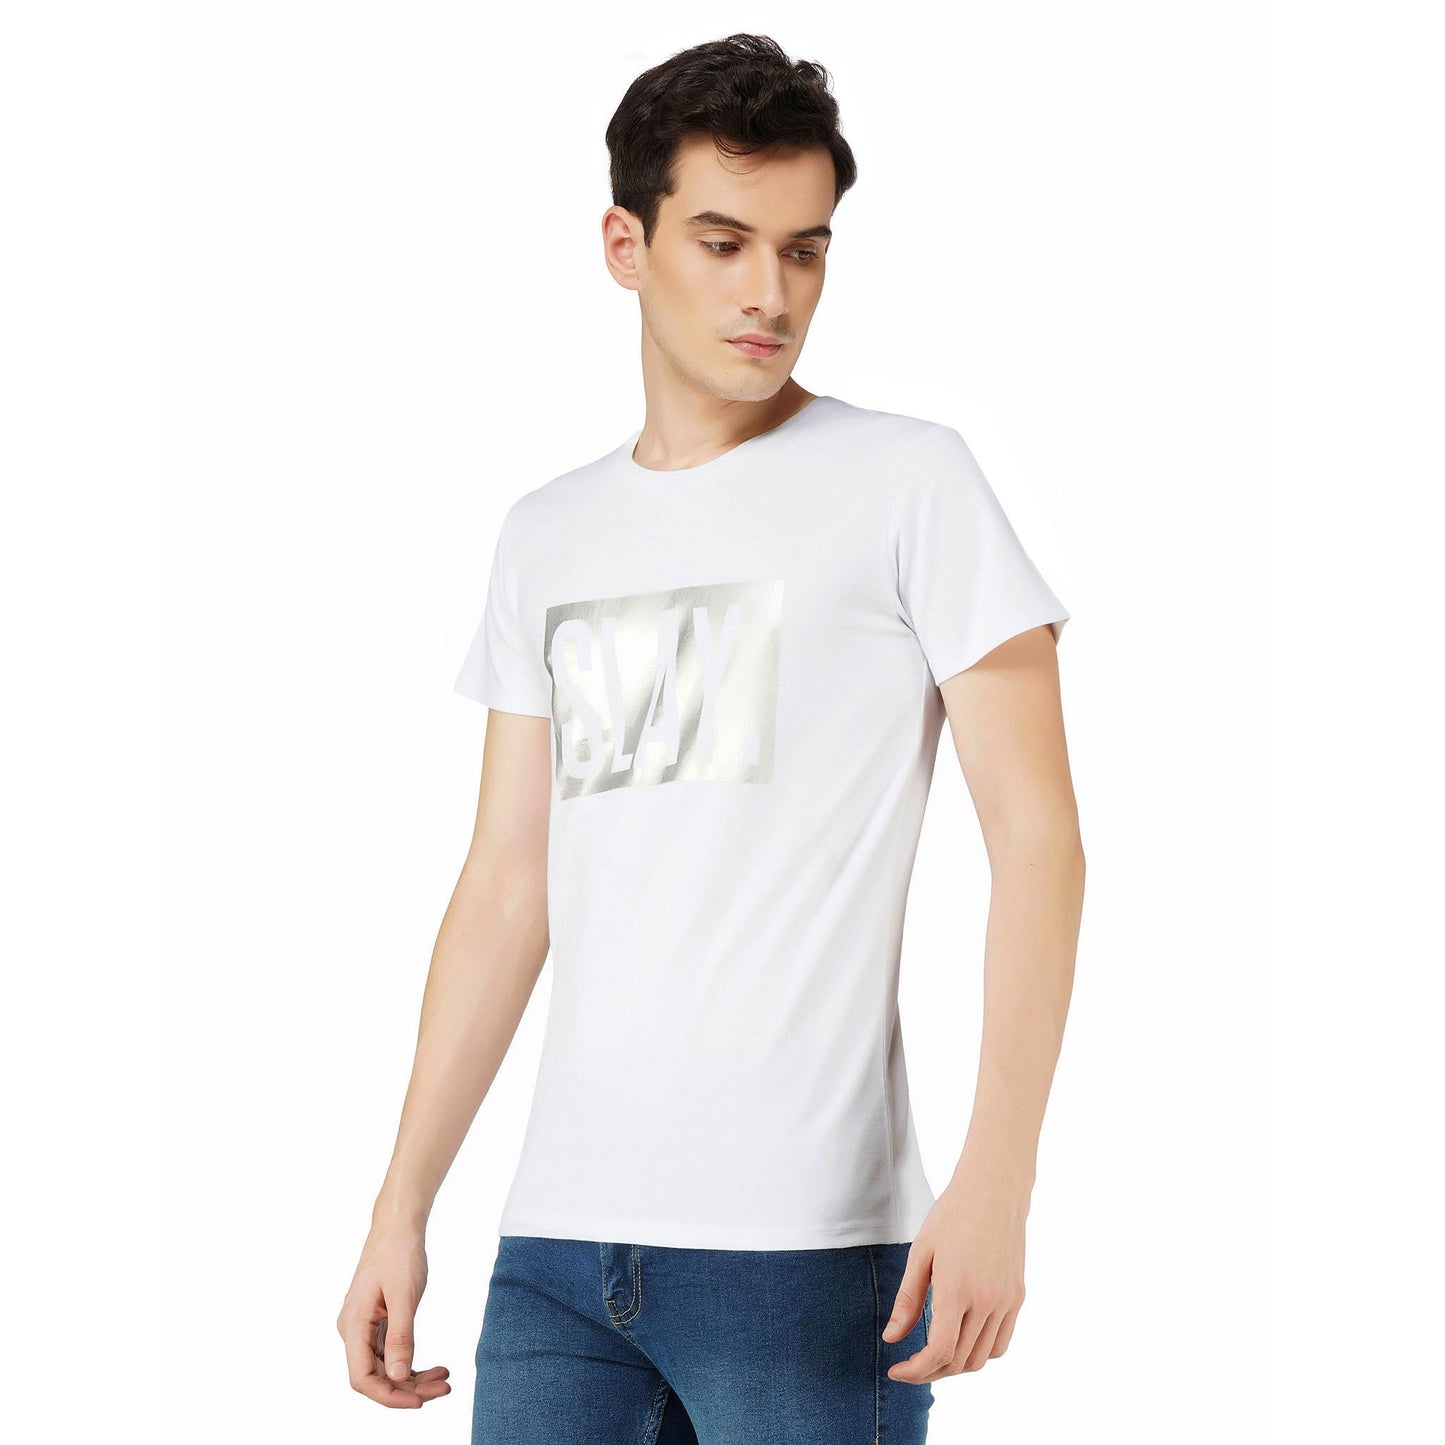 SLAY. Classic Men's Limited Edition Silver Foil Printed T-shirt-clothing-to-slay.myshopify.com-T-Shirt